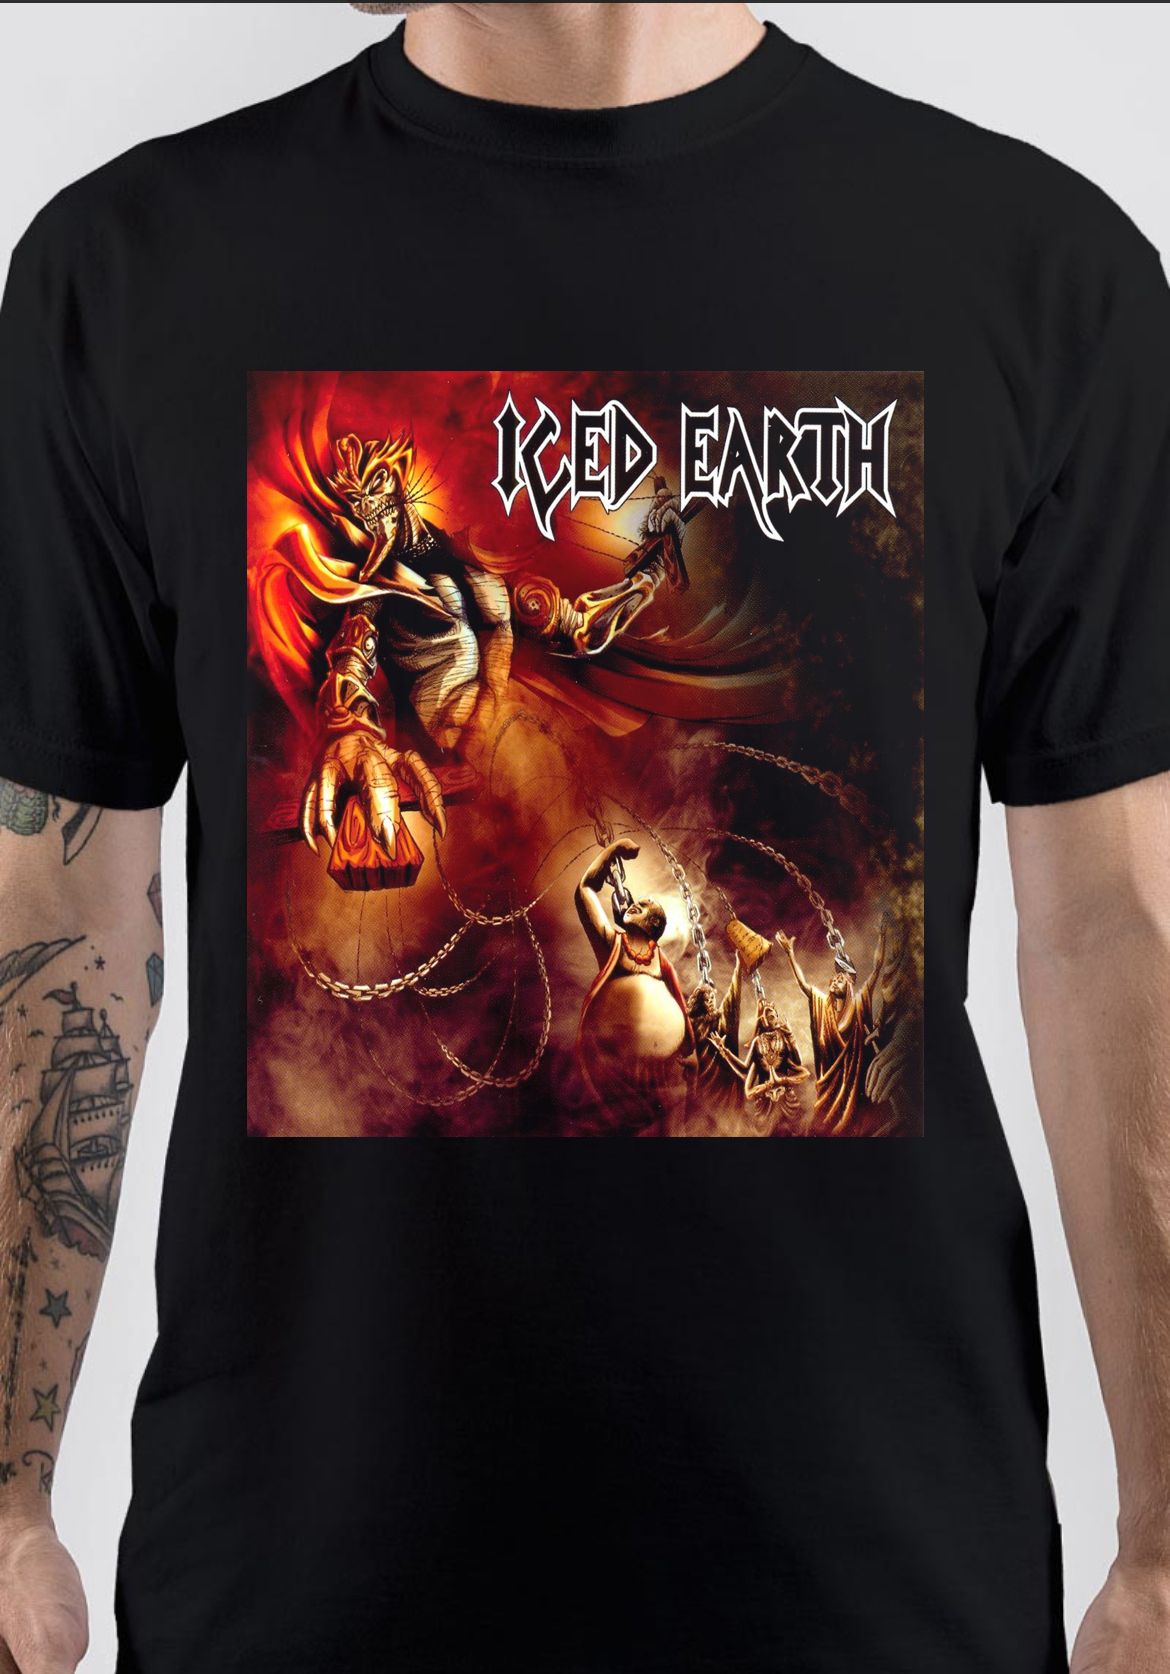 Iced Earth T-Shirt And Merchandise